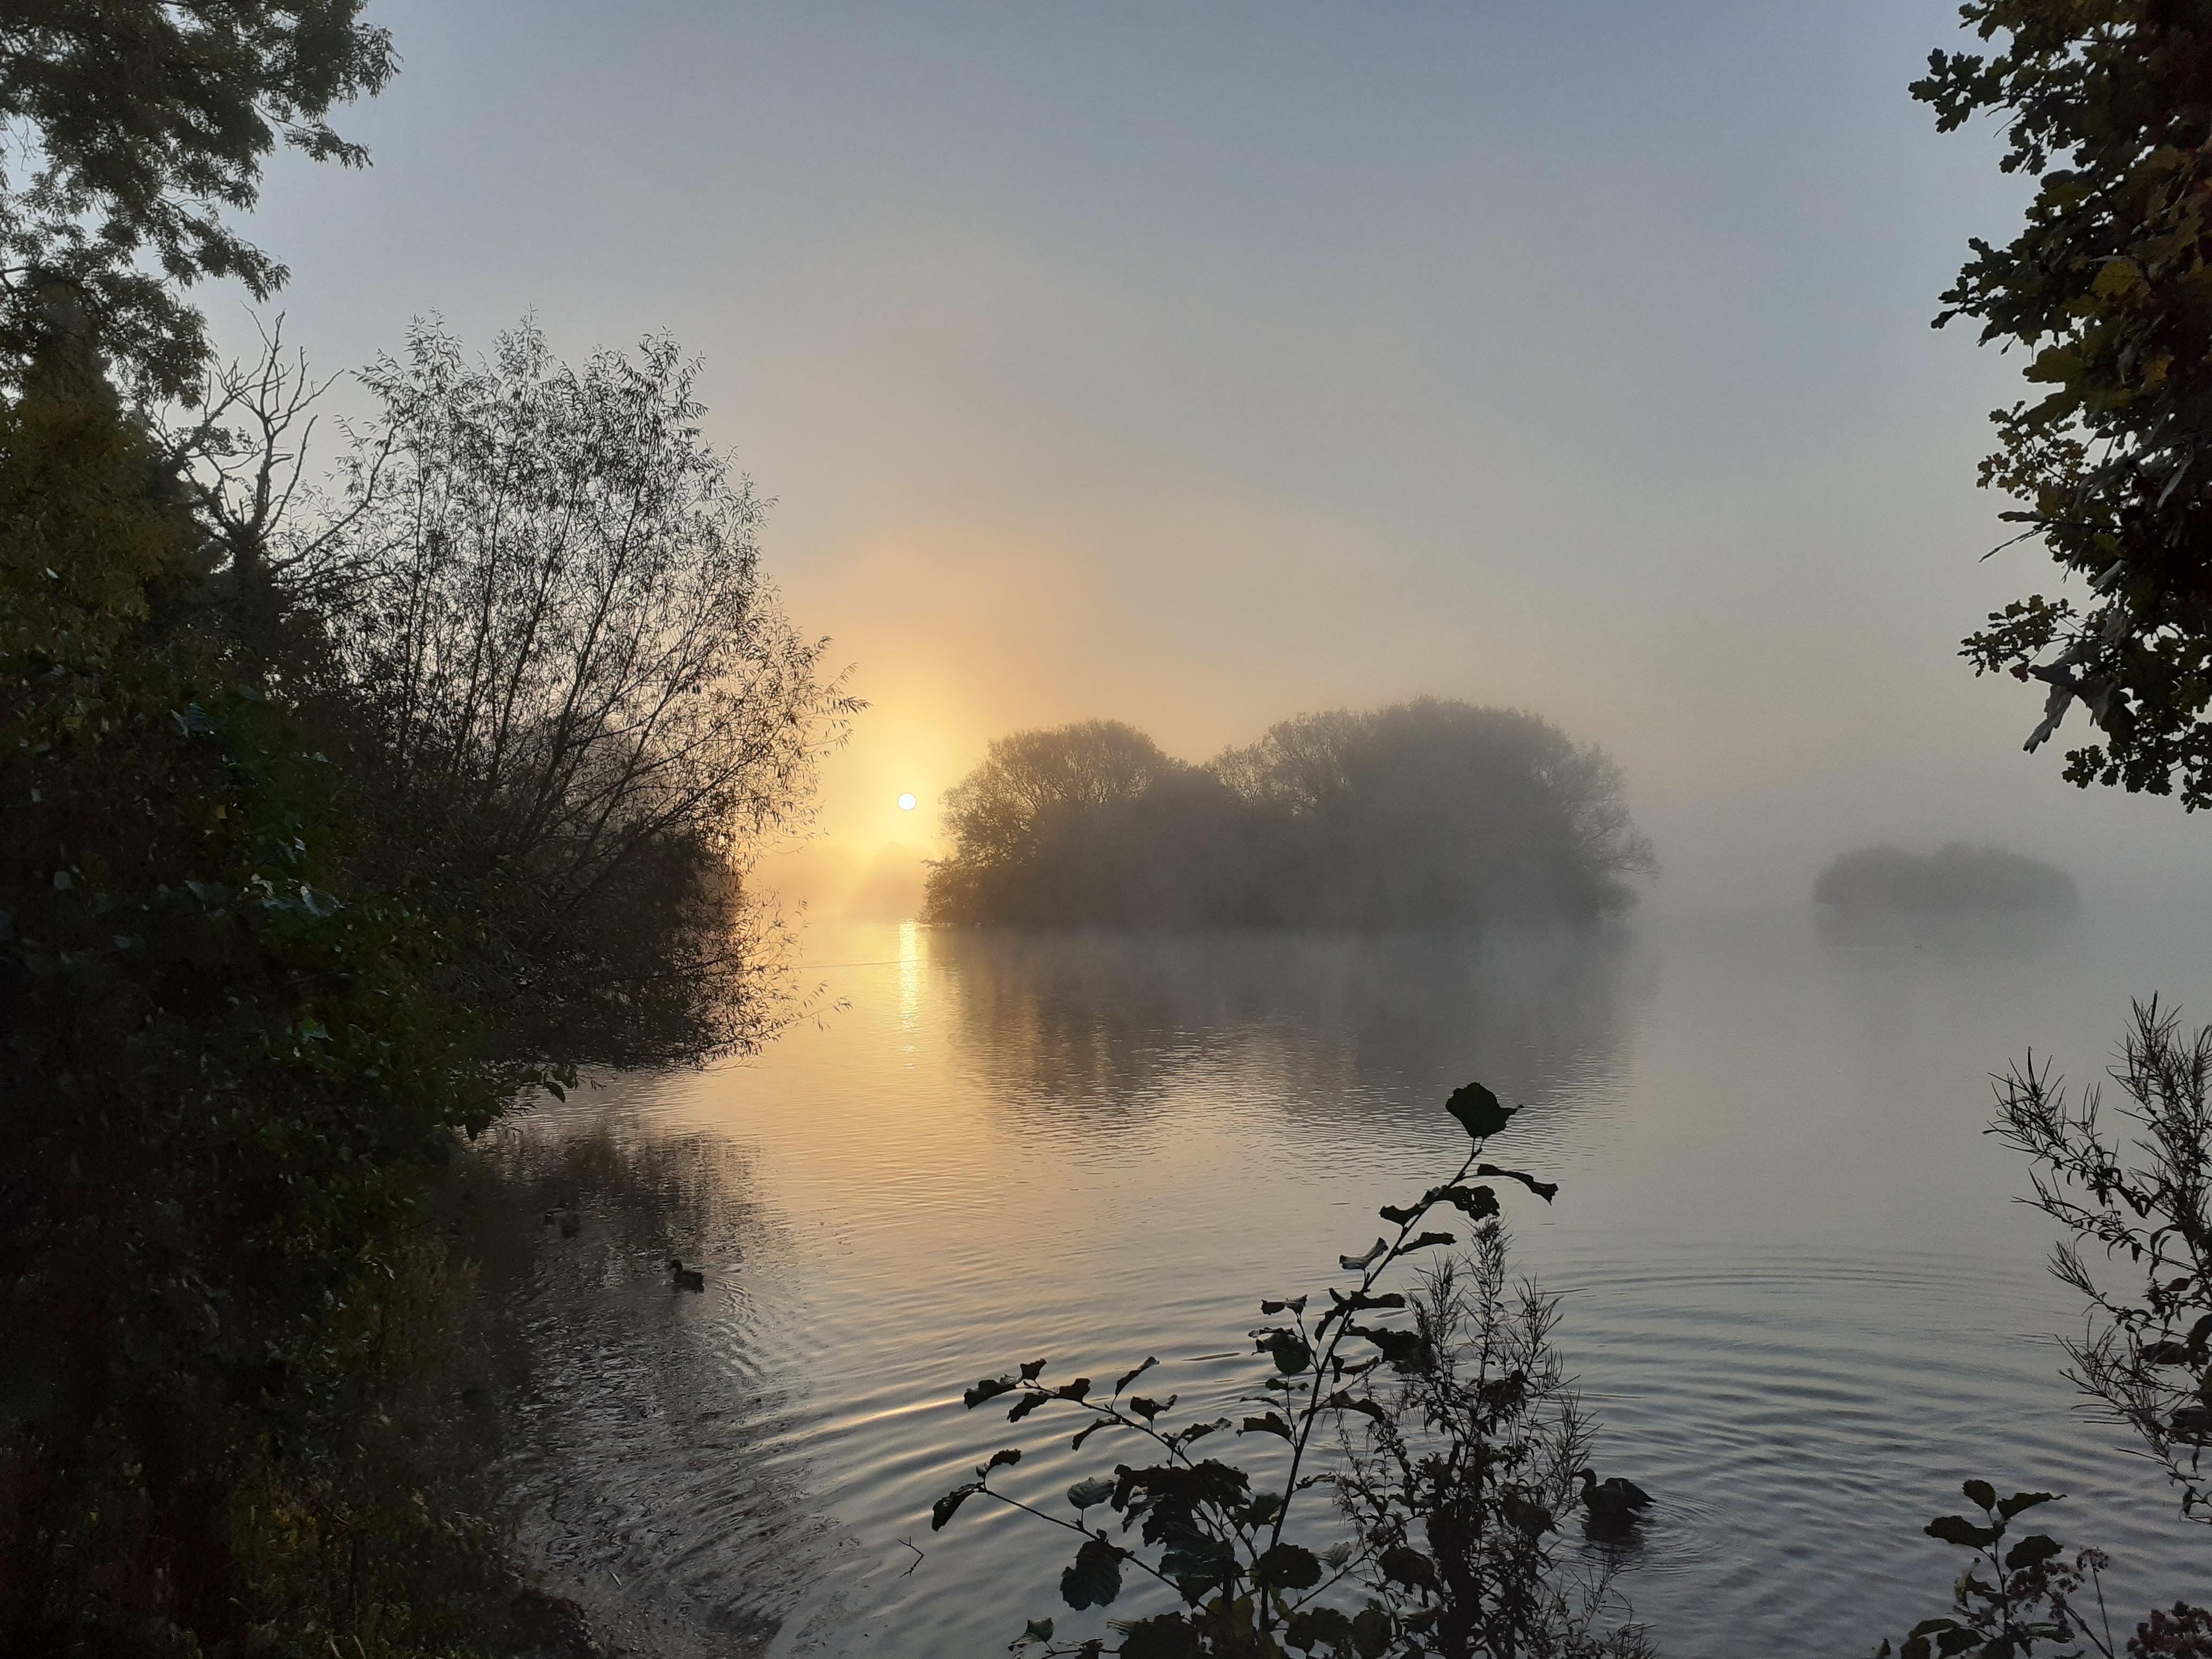 A photograph featuring a misty sunrise over a lake at Kingsbury Water Park